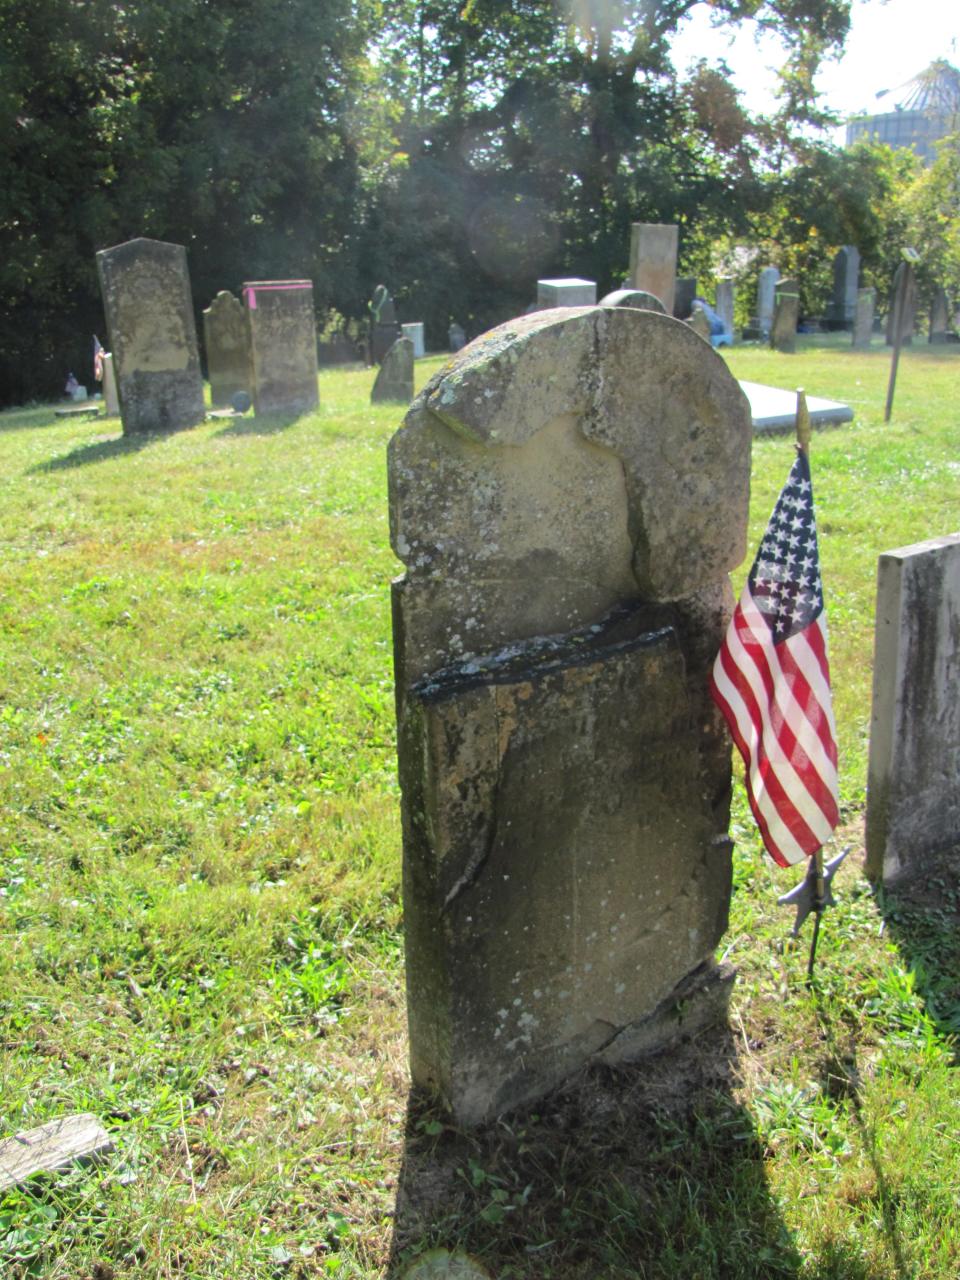 Hannah Spellman’s grave is one of the oldest in the cemetery. She passed away in the village in 1811.